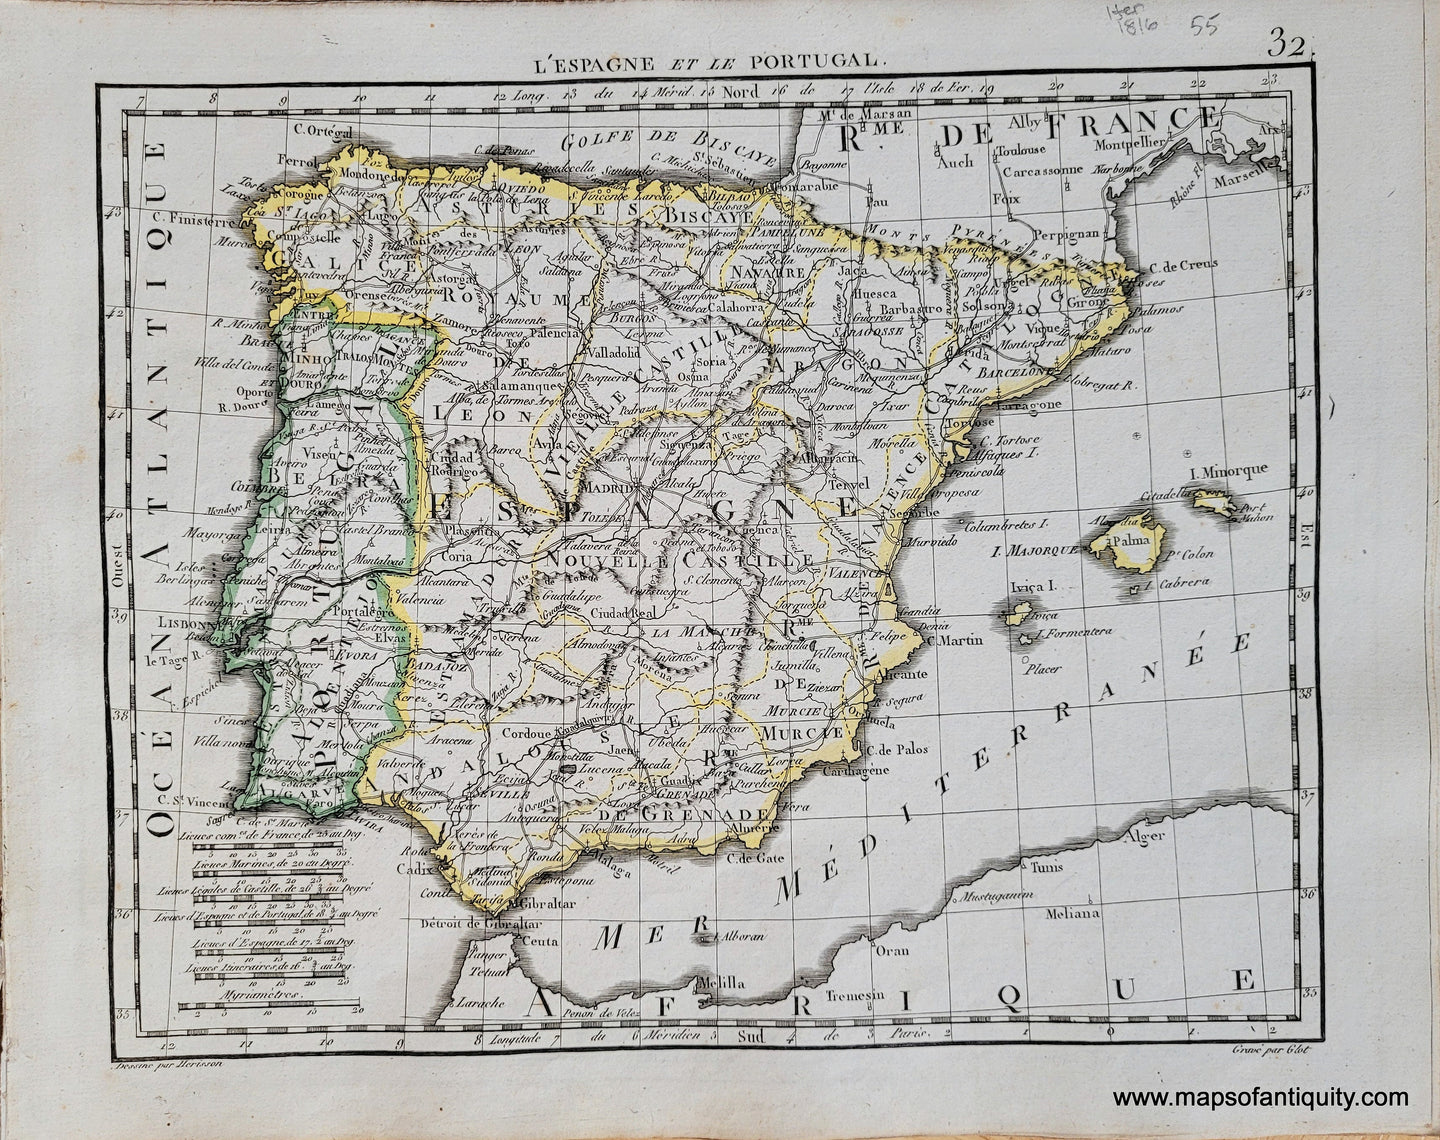 Genuine-Antique-Map-Spain-and-Portugal-LEspagne-et-le-Portugal-Spain-Portugal-1816-Herisson-Maps-Of-Antiquity-1800s-19th-century